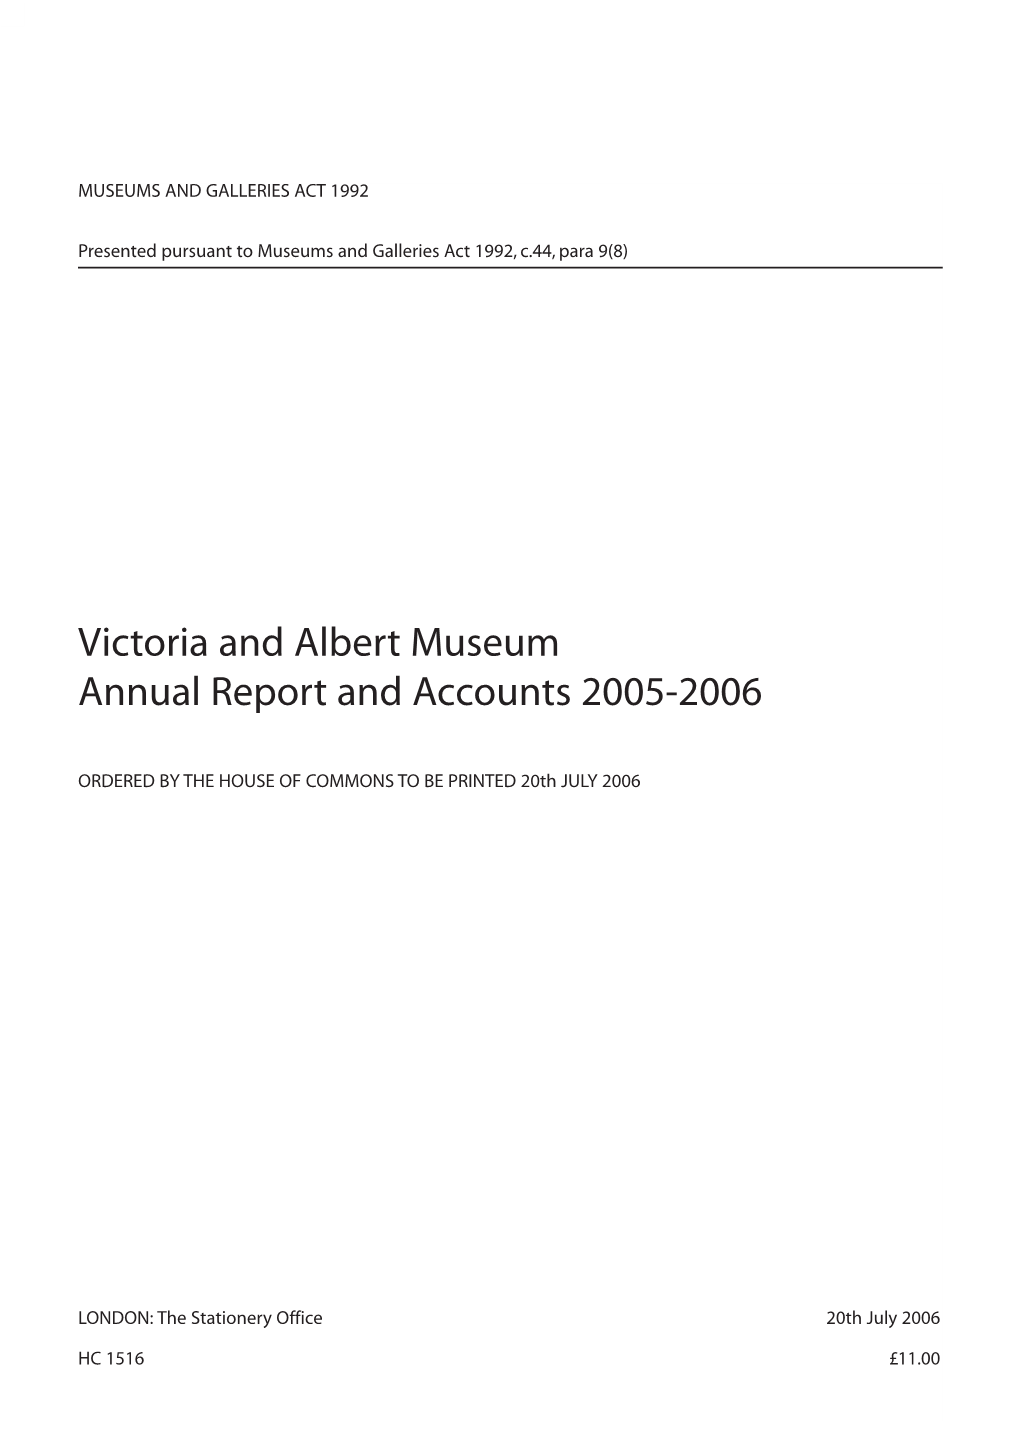 Victoria and Albert Museum Annual Report and Accounts 2005-2006